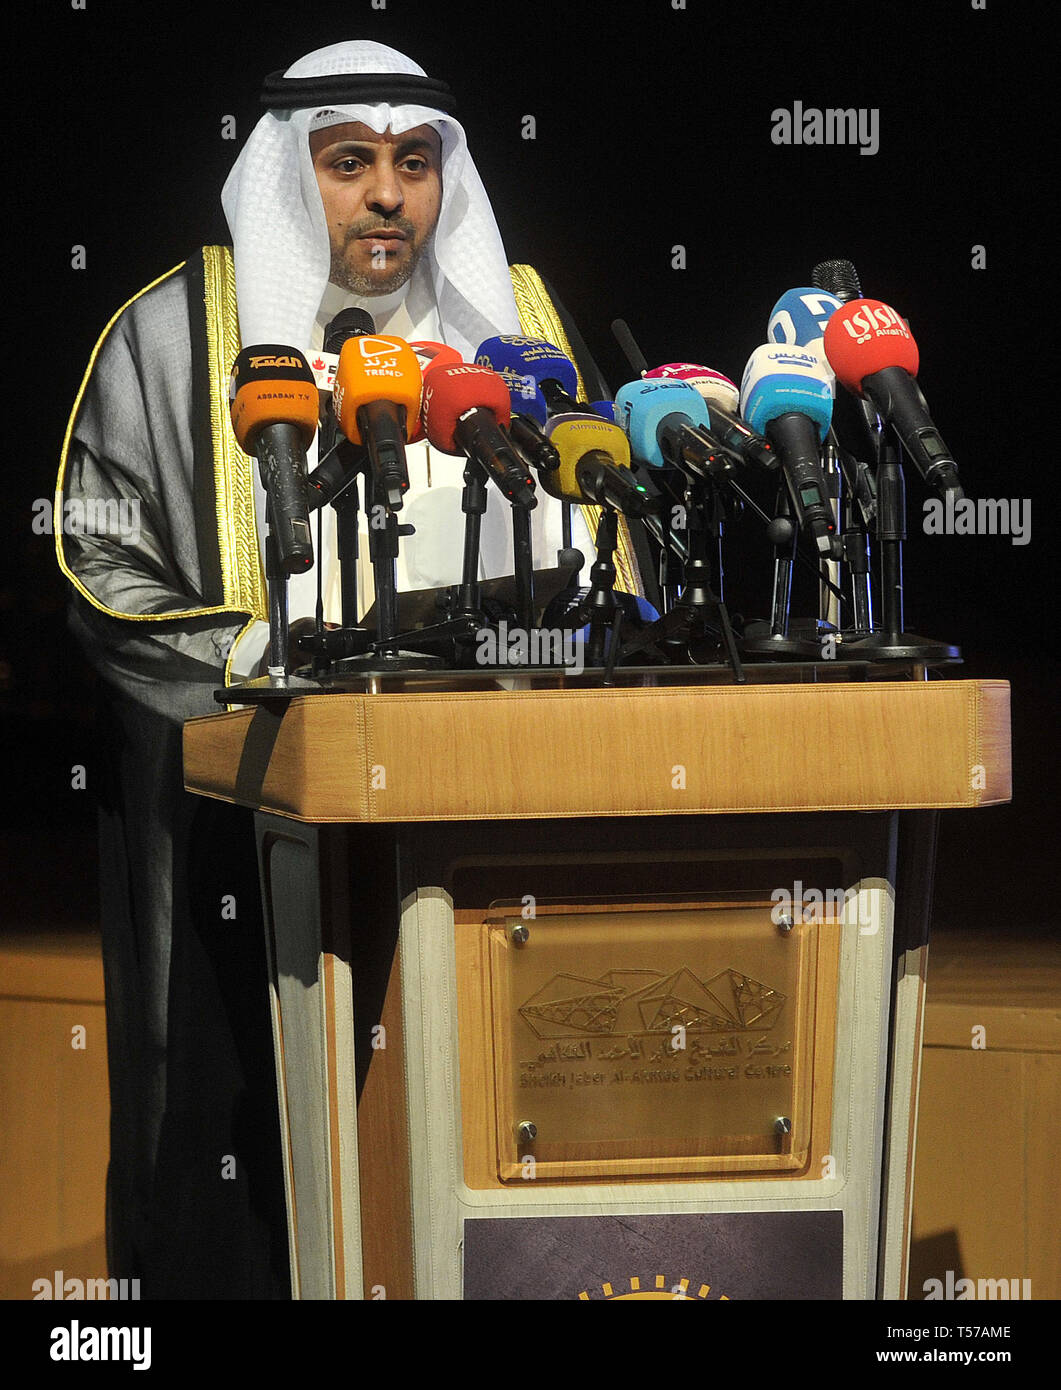 Kuwait City, Kuwait. 21st Apr, 2019. Mohammad Al-Jabri, Kuwait's minister of information and minister of state for youth affairs, speaks at the opening ceremony of the 16th Arab Media Forum in Kuwait City, Kuwait, on April 21, 2019. The two-day forum will discuss several topics including humanization of media, the reality and future of the Arab's media, the skill of dealing with social media and the language of dialogue. Credit: Asad/Xinhua/Alamy Live News Stock Photo